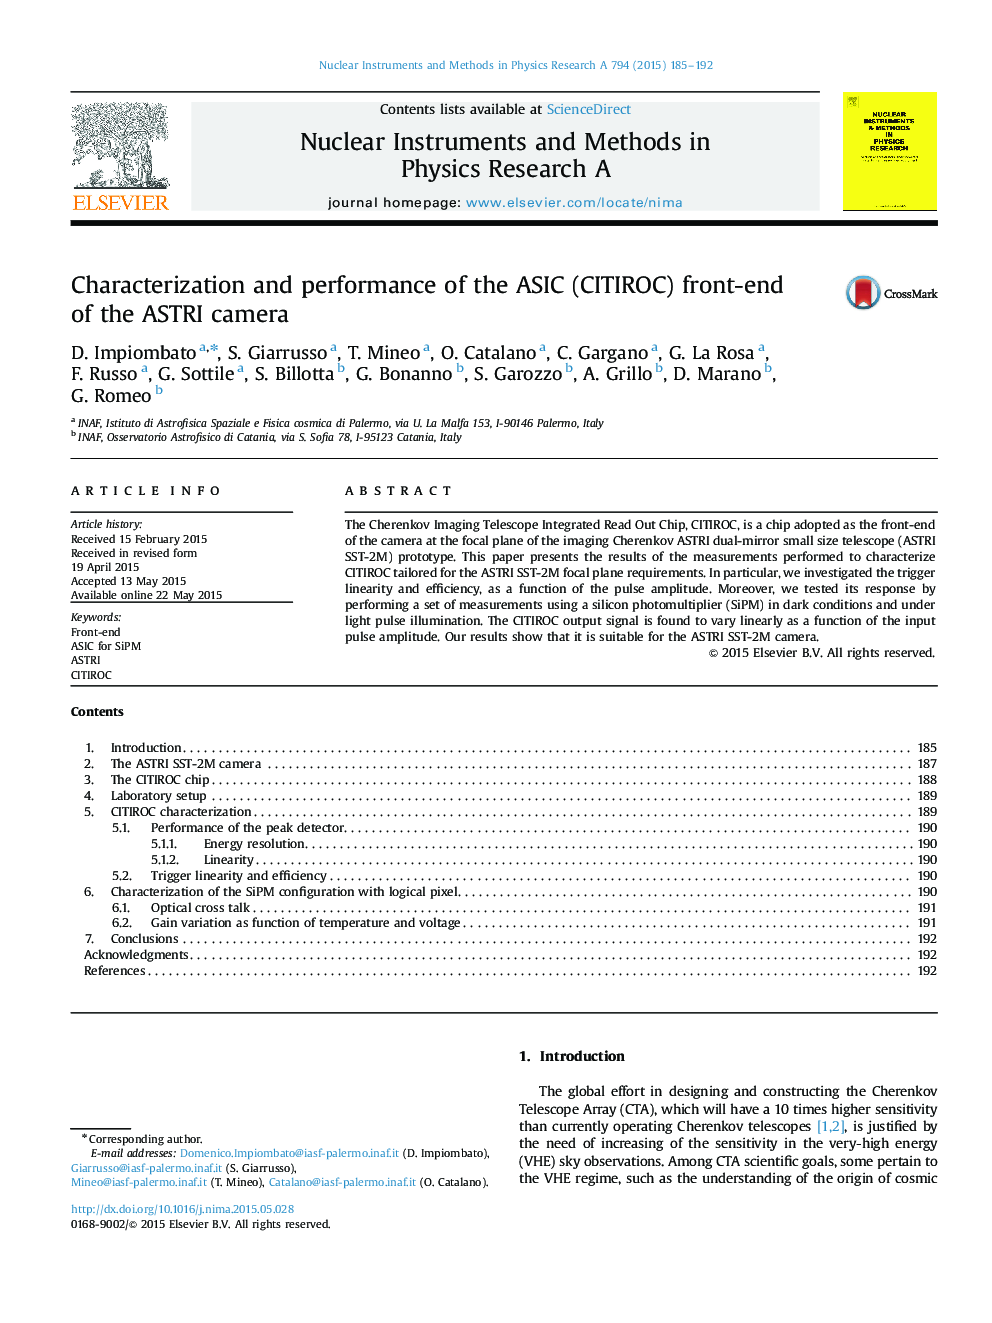 Characterization and performance of the ASIC (CITIROC) front-end of the ASTRI camera